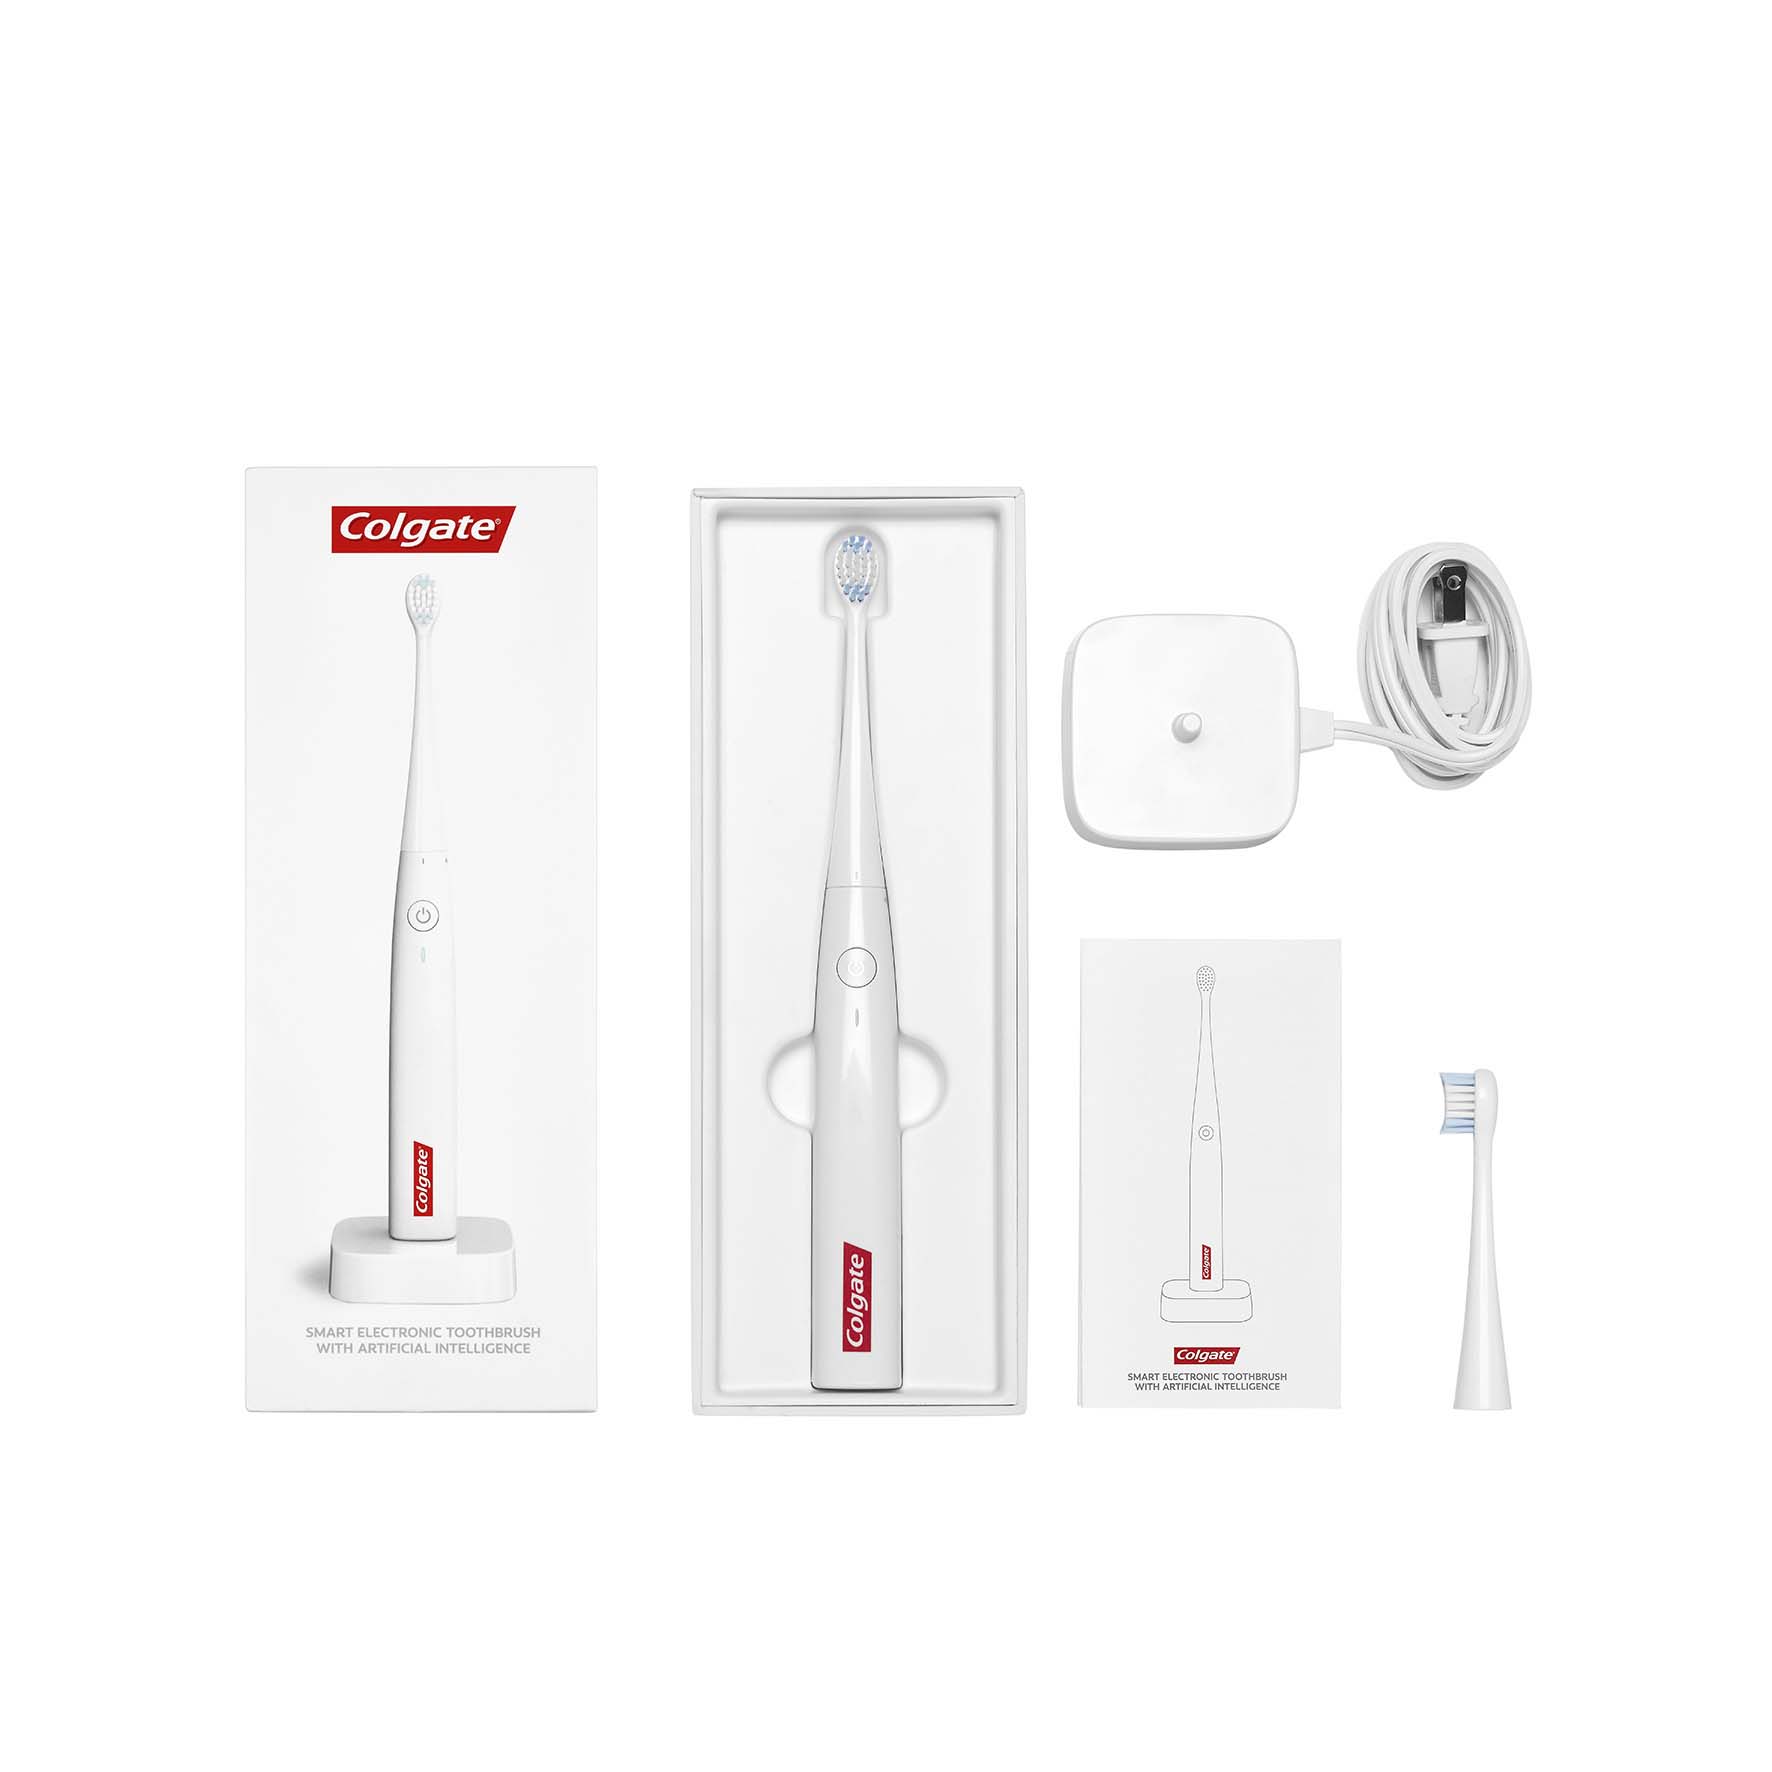 Colgate® Smart Electronic Toothbrush E1 with Artificial